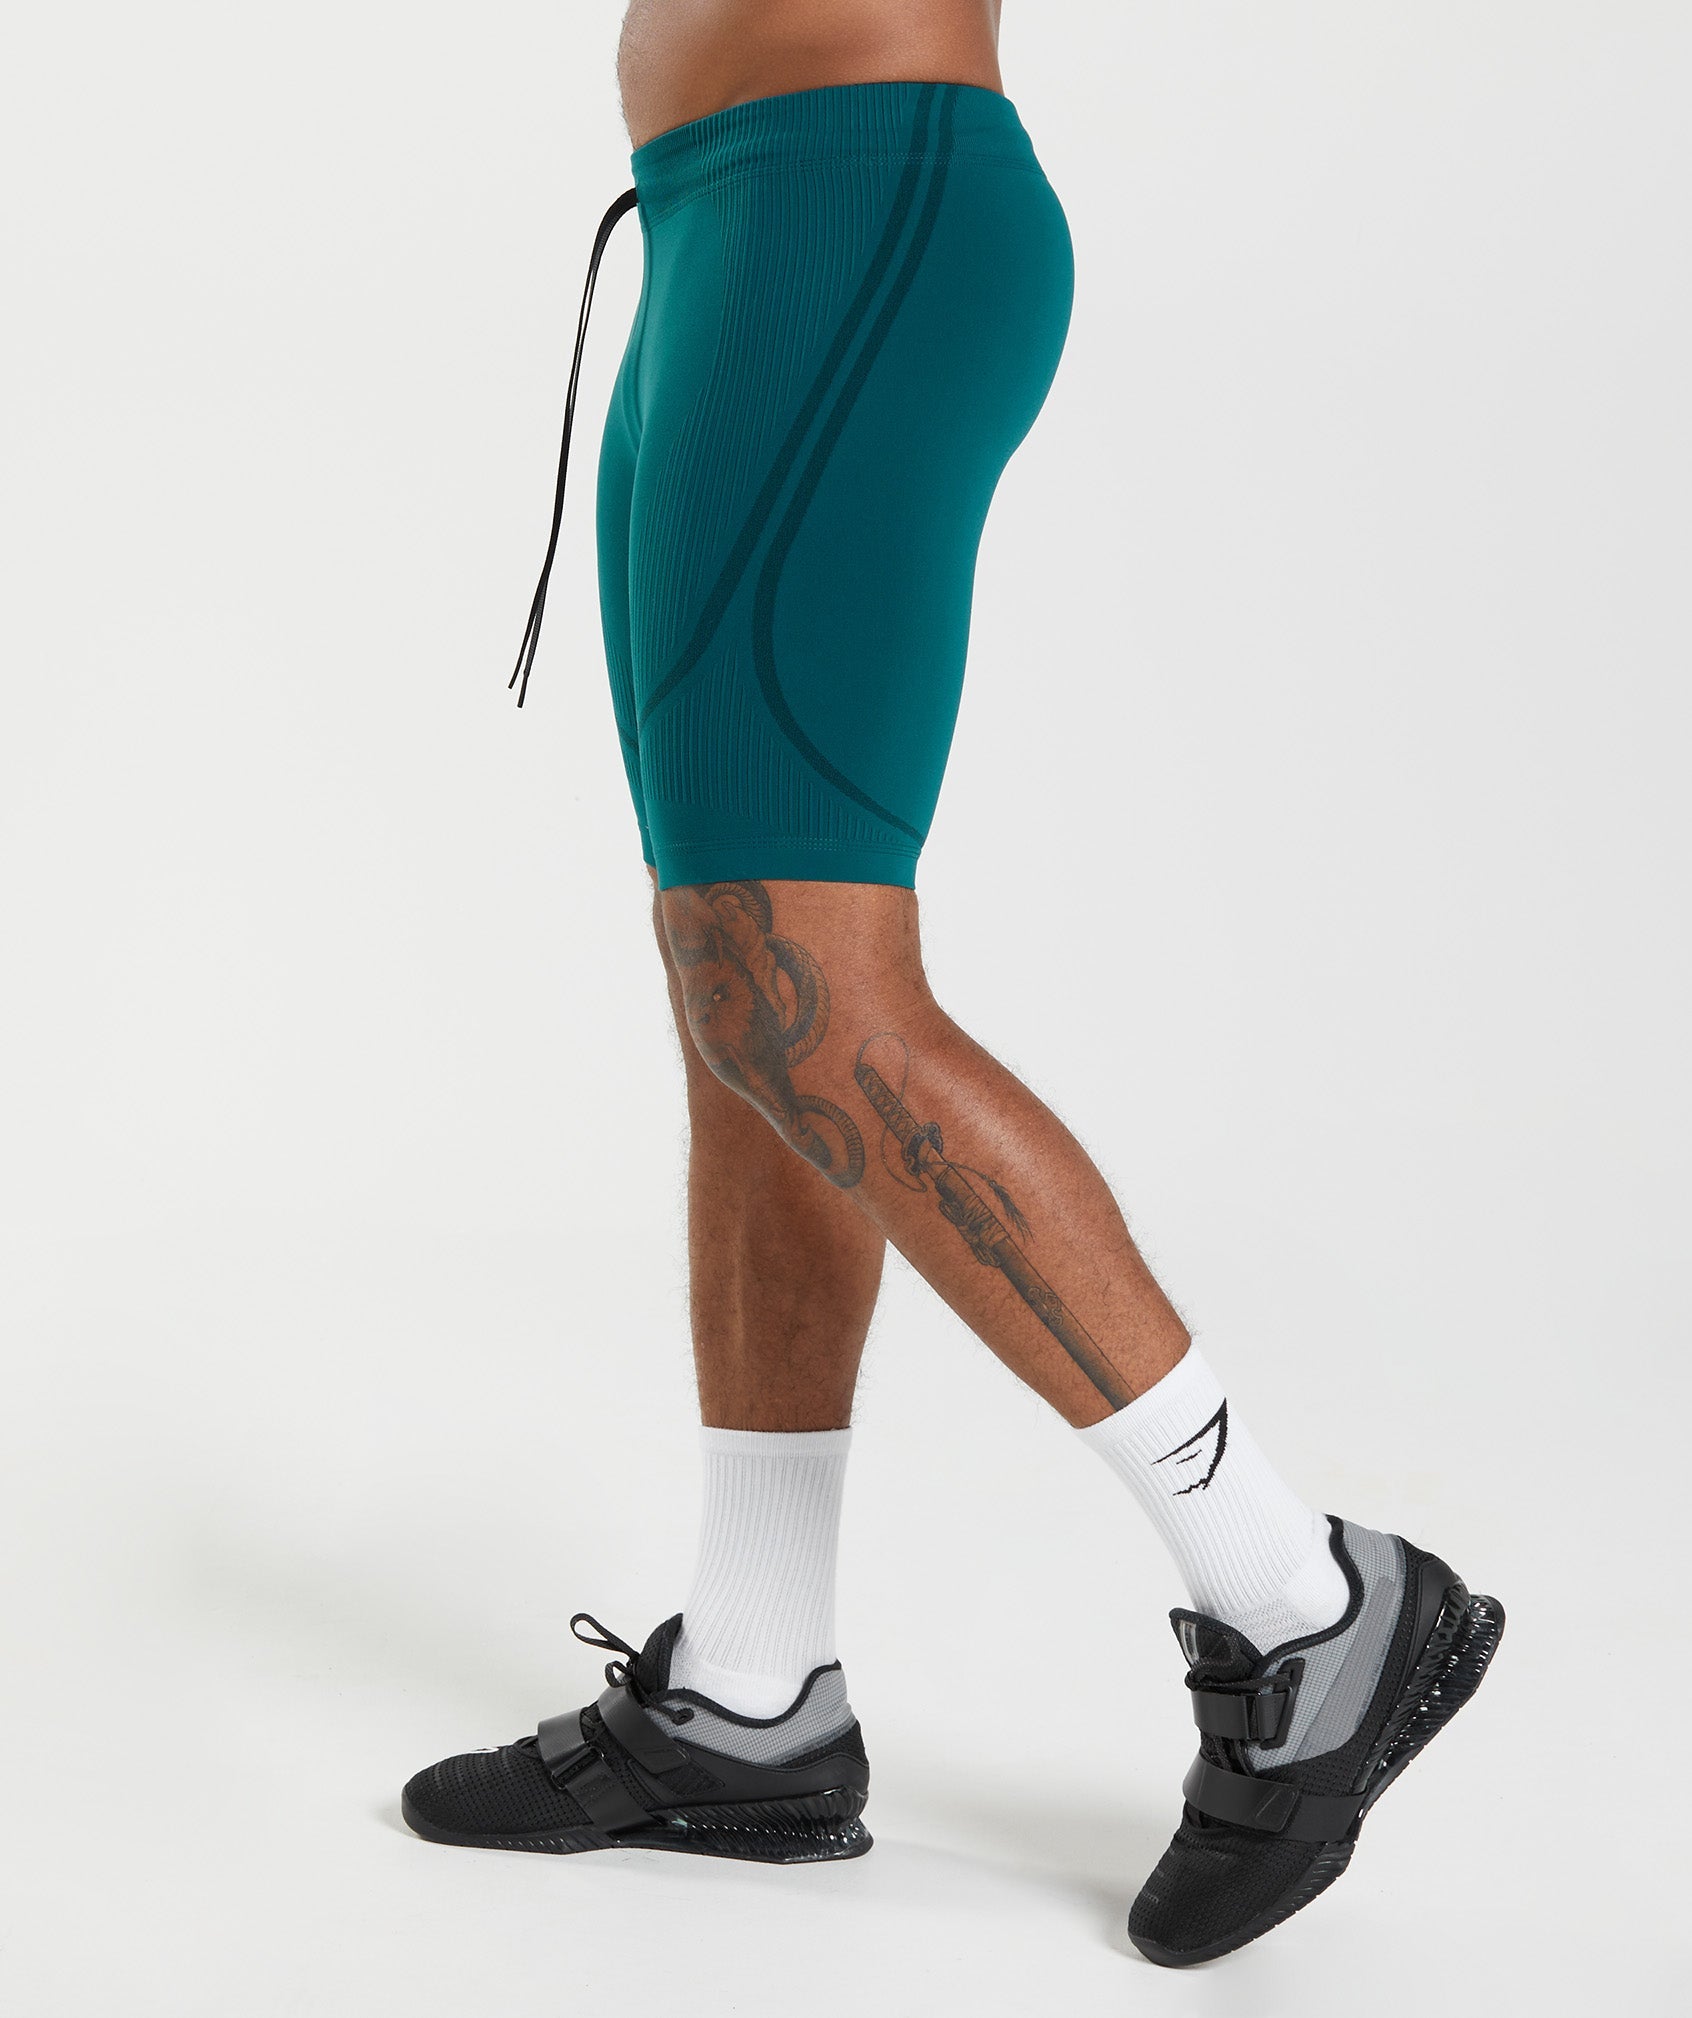 315 Seamless 1/2 Shorts in Winter Teal/Black - view 3